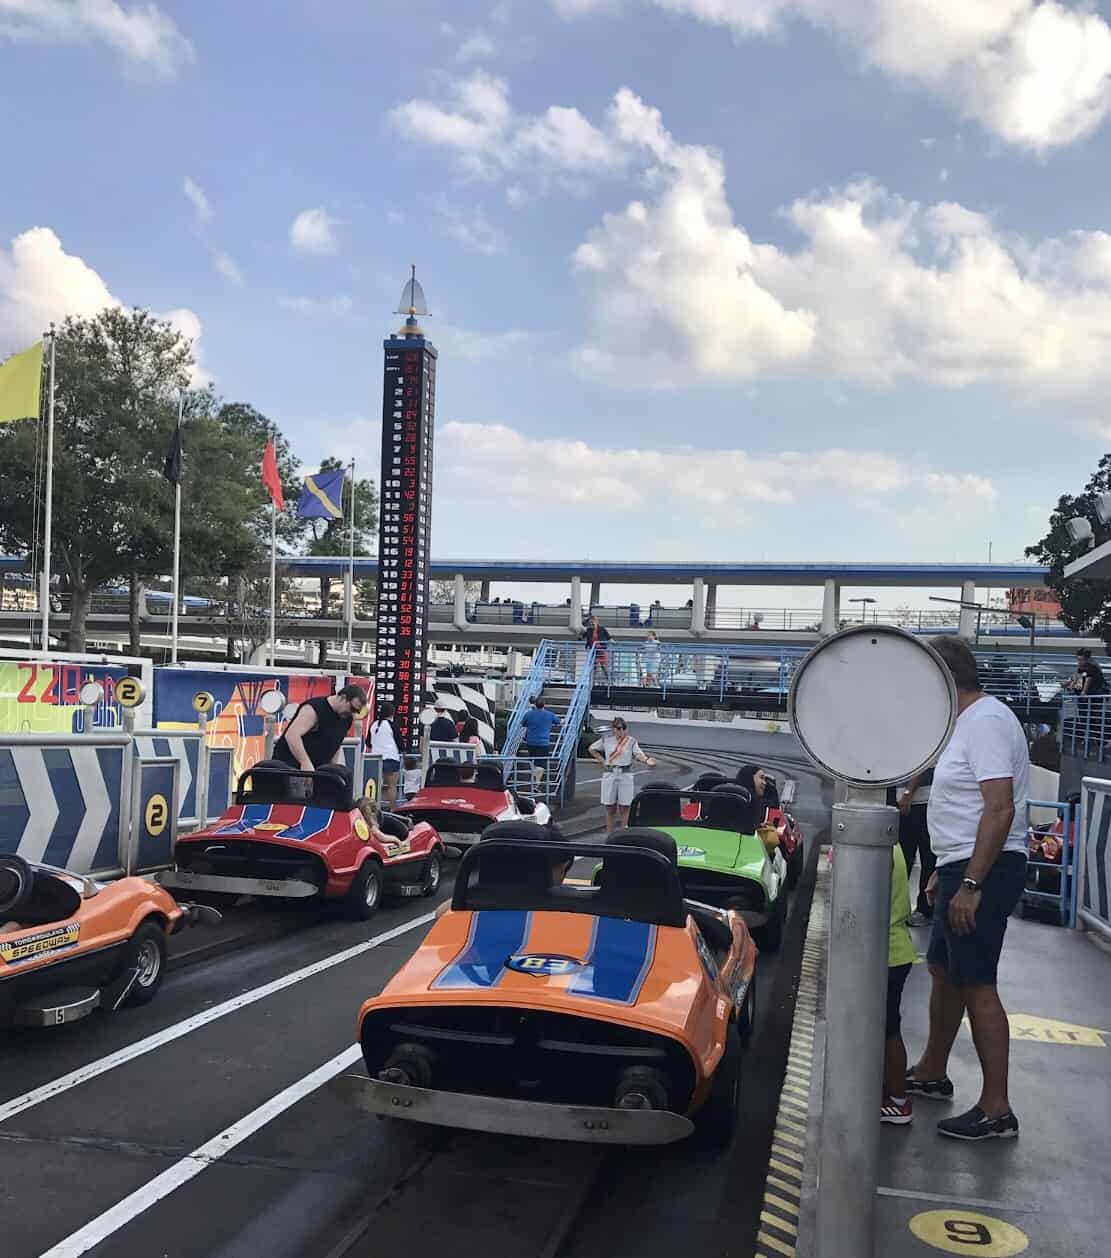 Vehicles at Tomorrowland Speedway in Tomorrowland